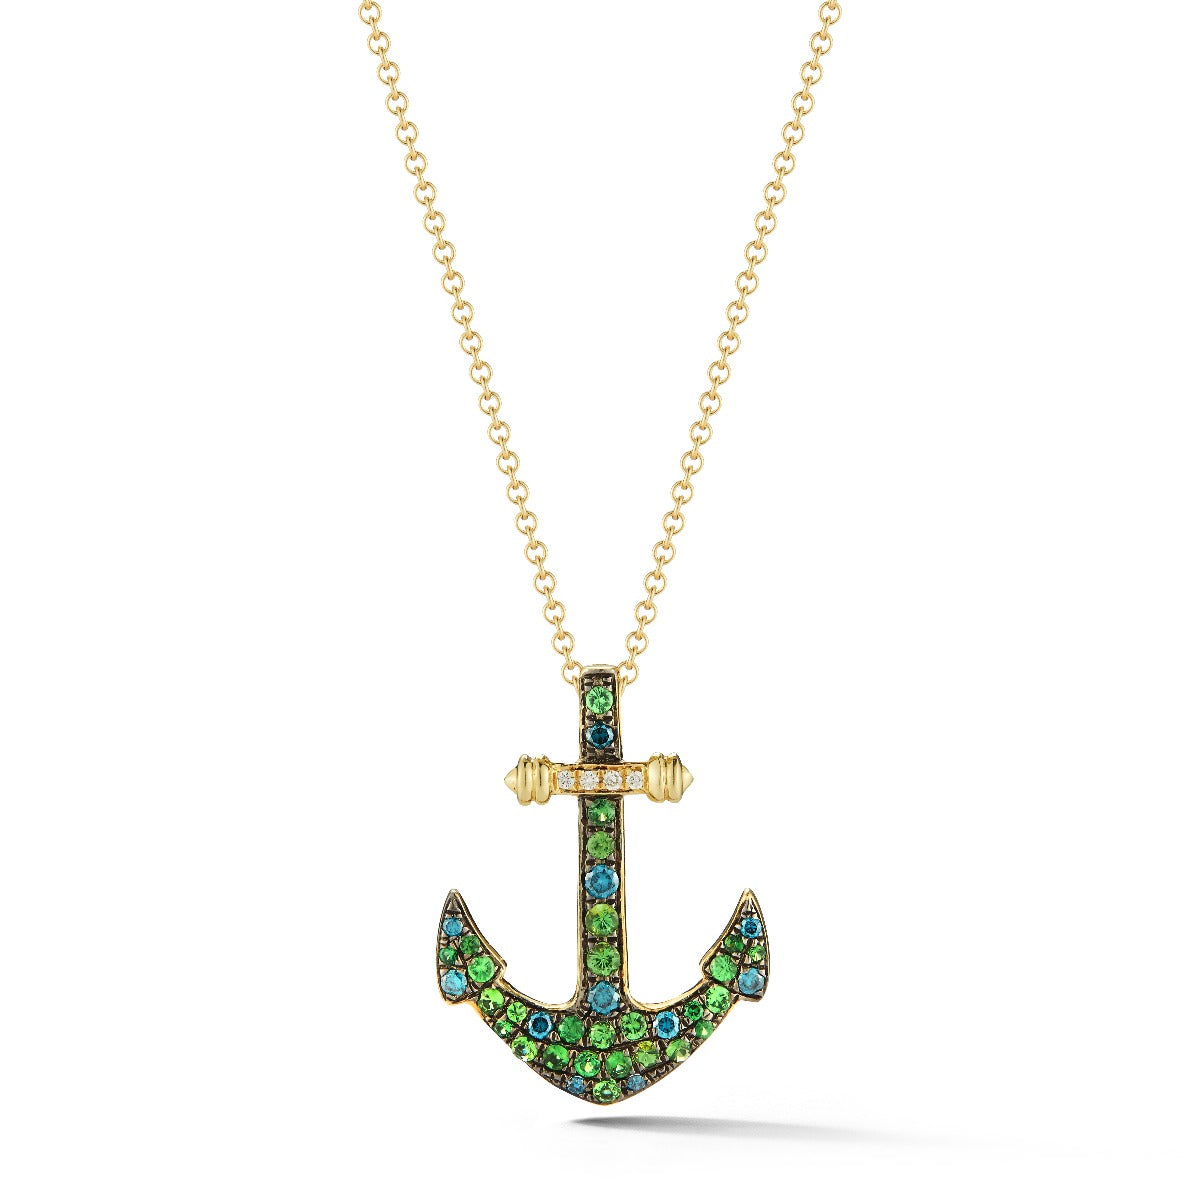 OUR OWN ORIGINAL ANCHOR IN 14K WARM YELLOW GOLD. SET WITH A  COMBINATION OF  TSAVORITES, BLUE DIAMONDS AND WHITE DIAMONDS 1 ON 18 INCHES CHAIN